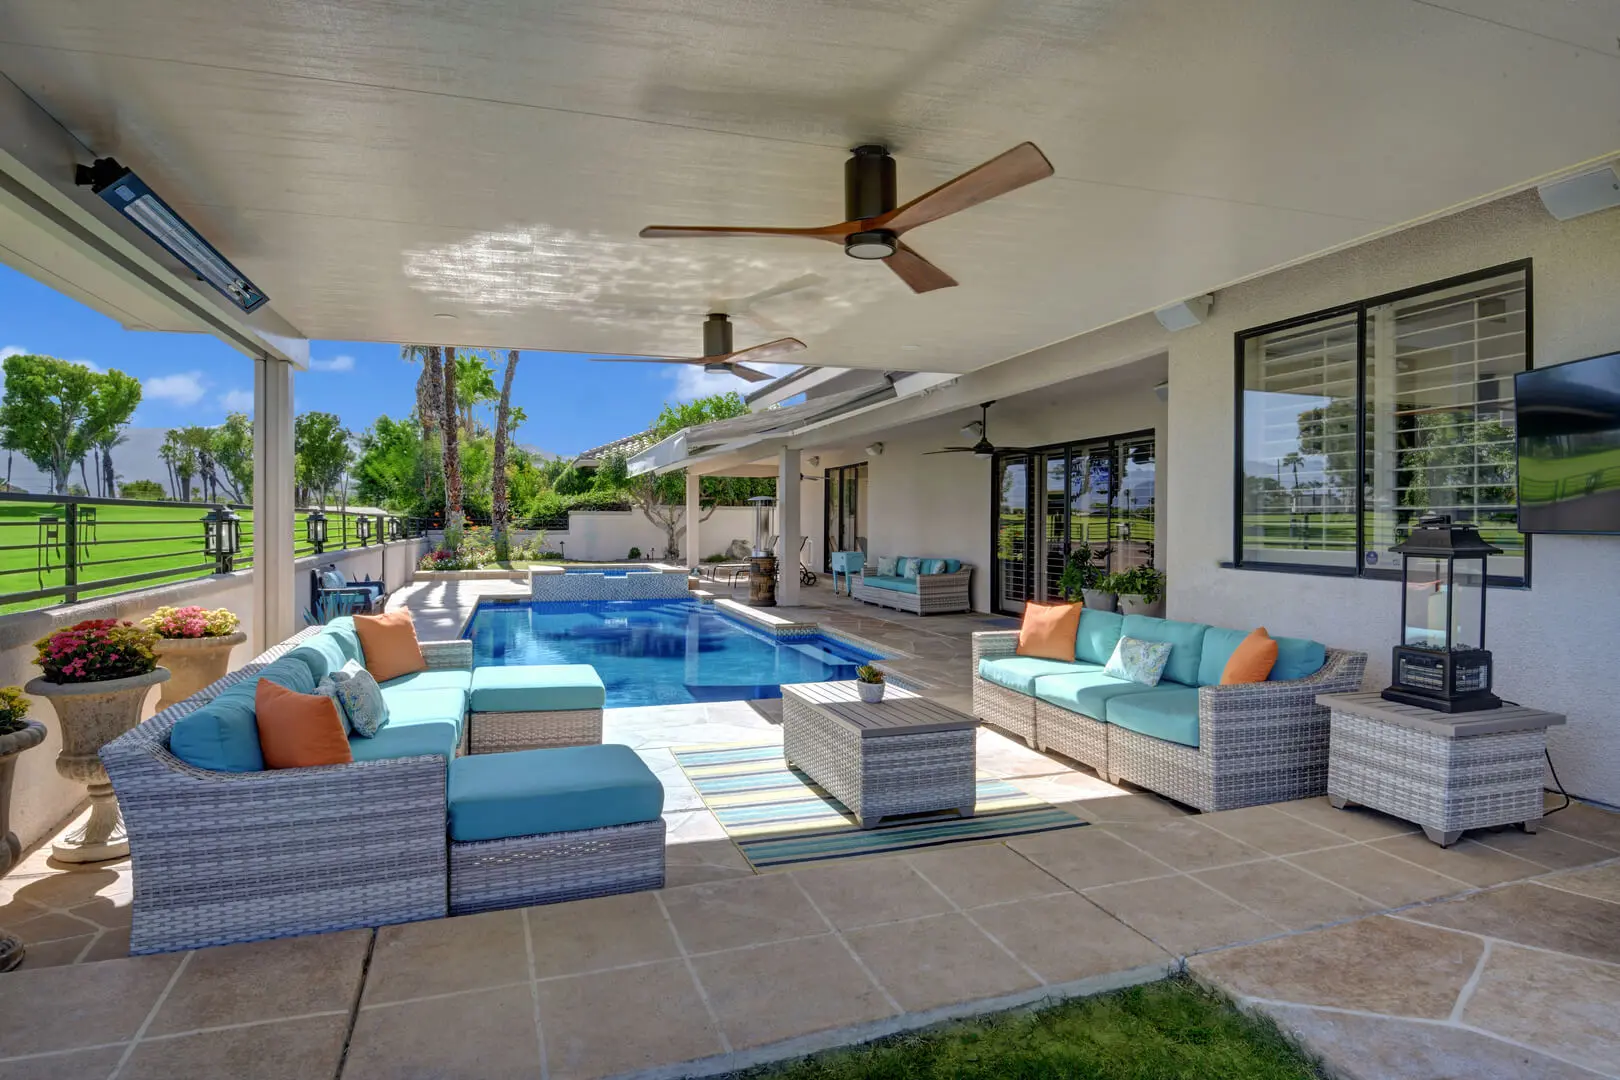 A patio with couches and pillows in front of the pool.